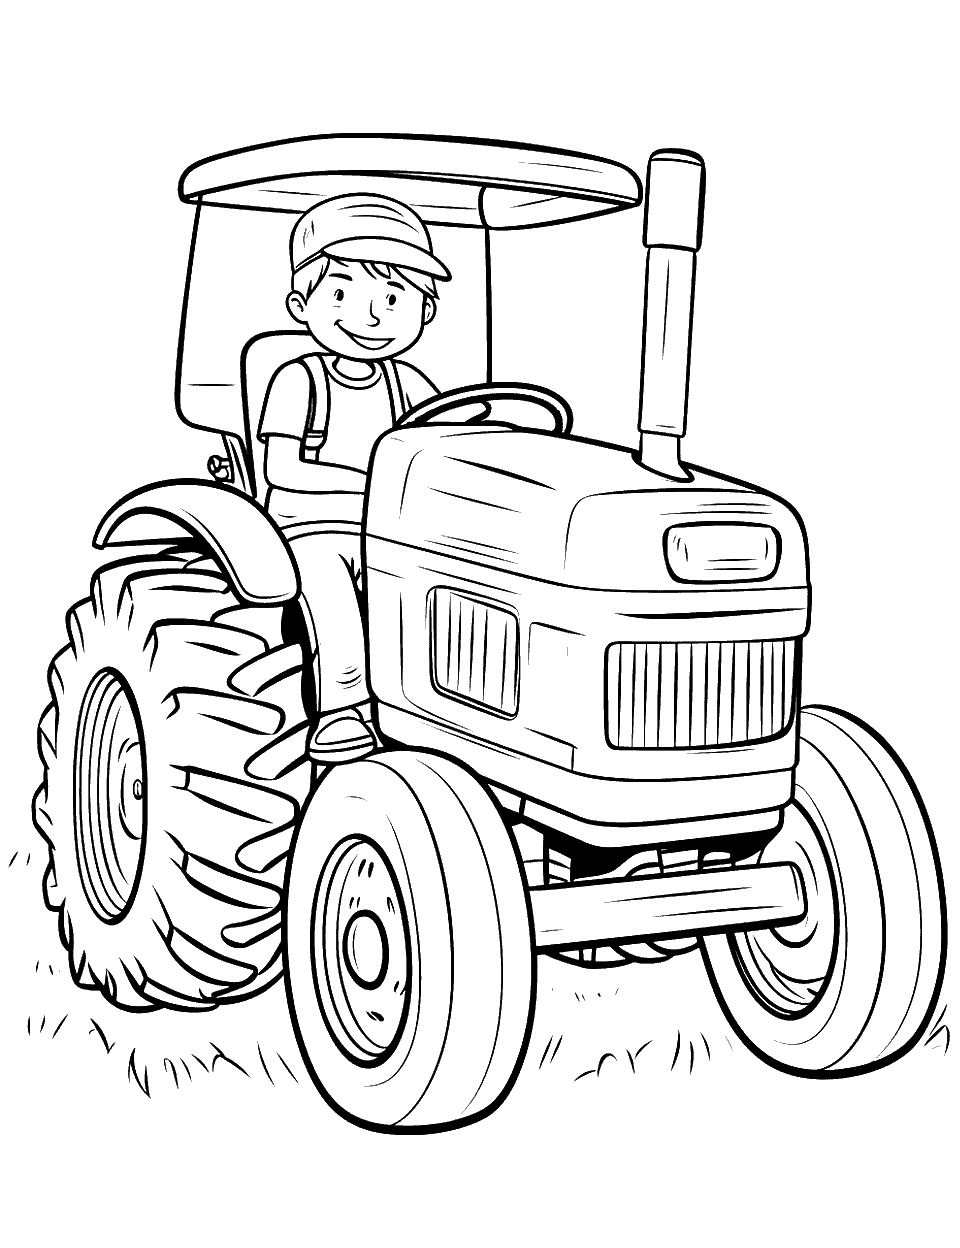 Farmer on a Tractor Coloring Page - A friendly farmer on the seat of his trusty tractor.